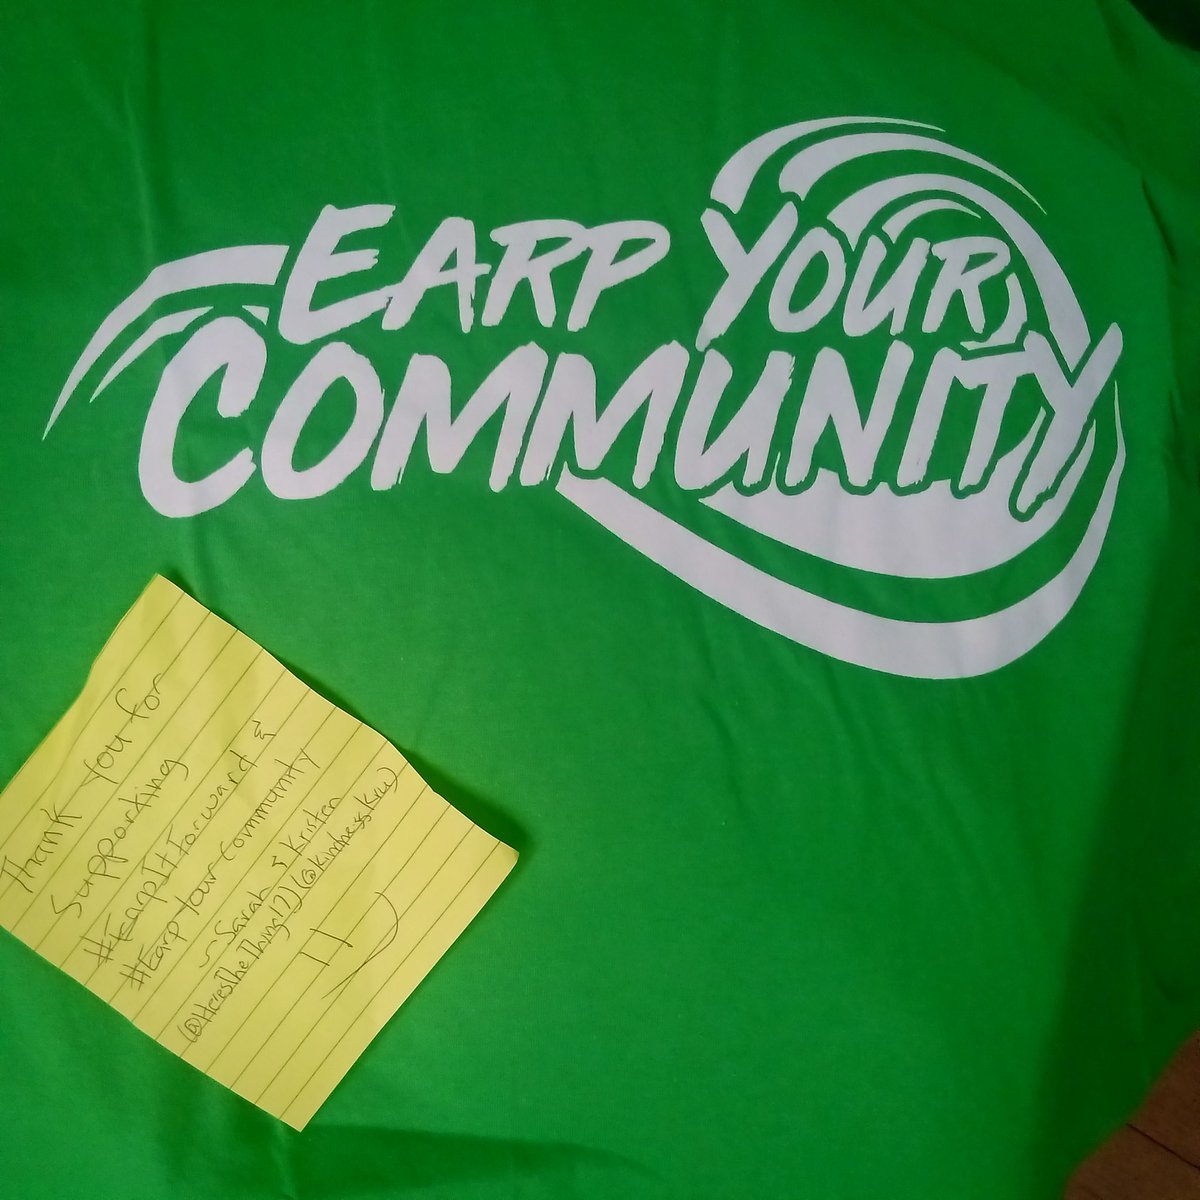 Received this in the mail today. Thank you @earpitforward @HeresTheThing17 @Kindnesskru for this! #earpitforward #earpyourcommunity